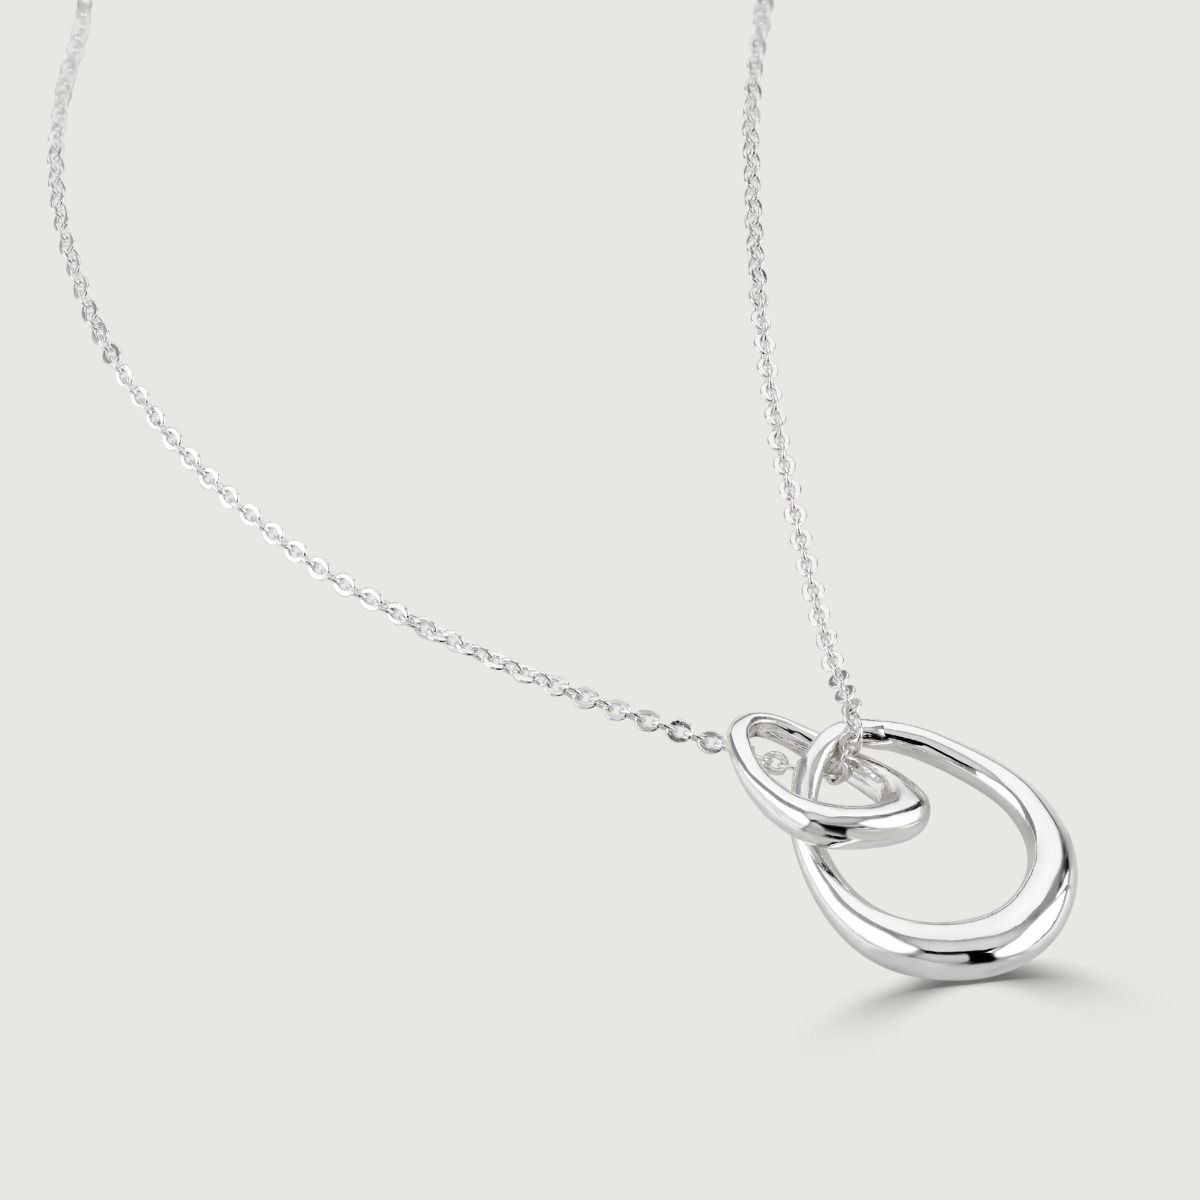 The Silver Organic Double Hoop Pendant is an elegant piece of jewelry crafted with precision. Its intertwining hoops and lustrous silver shine symbolize unity and connection, making it a versatile and sophisticated accessory for any occasion
